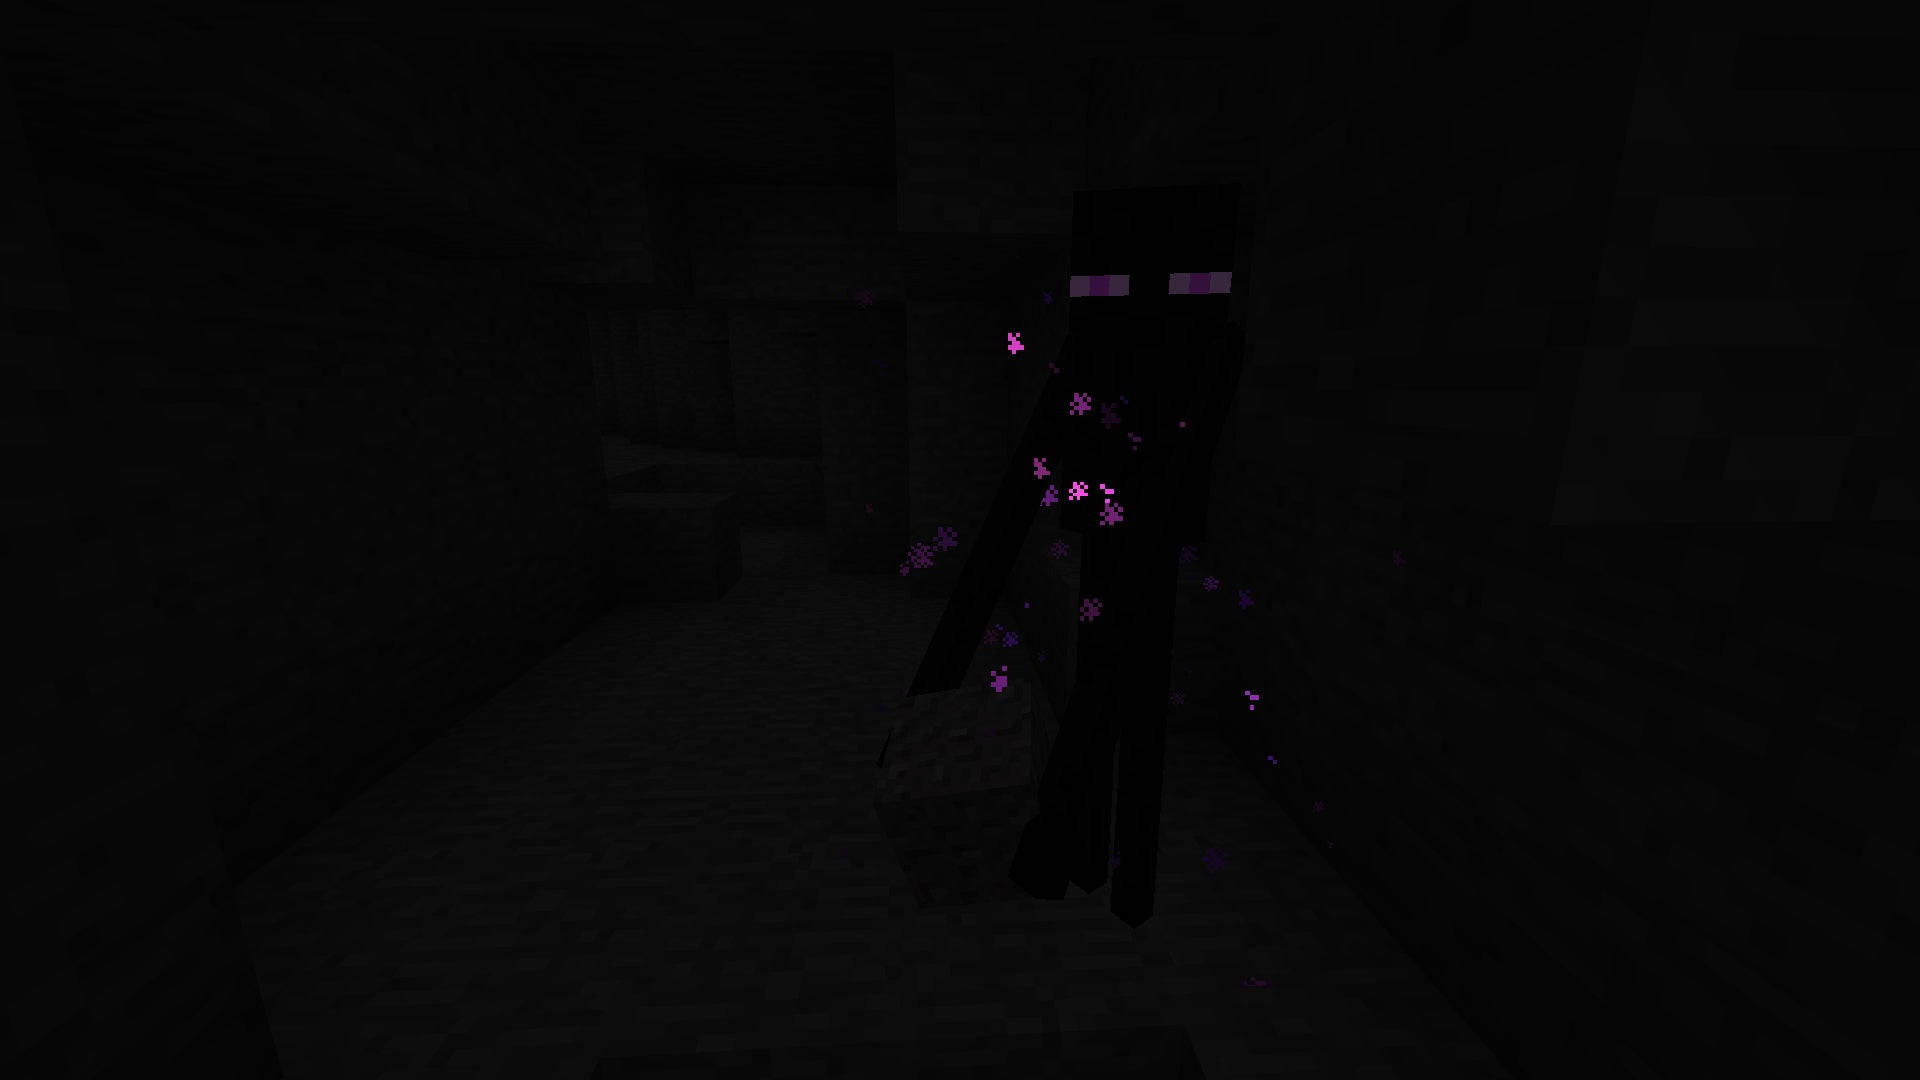 An Enderman, A Unique Creature From The Popular Video Game Minecraft, Captured In A Stunning, High Resolution Image. Background